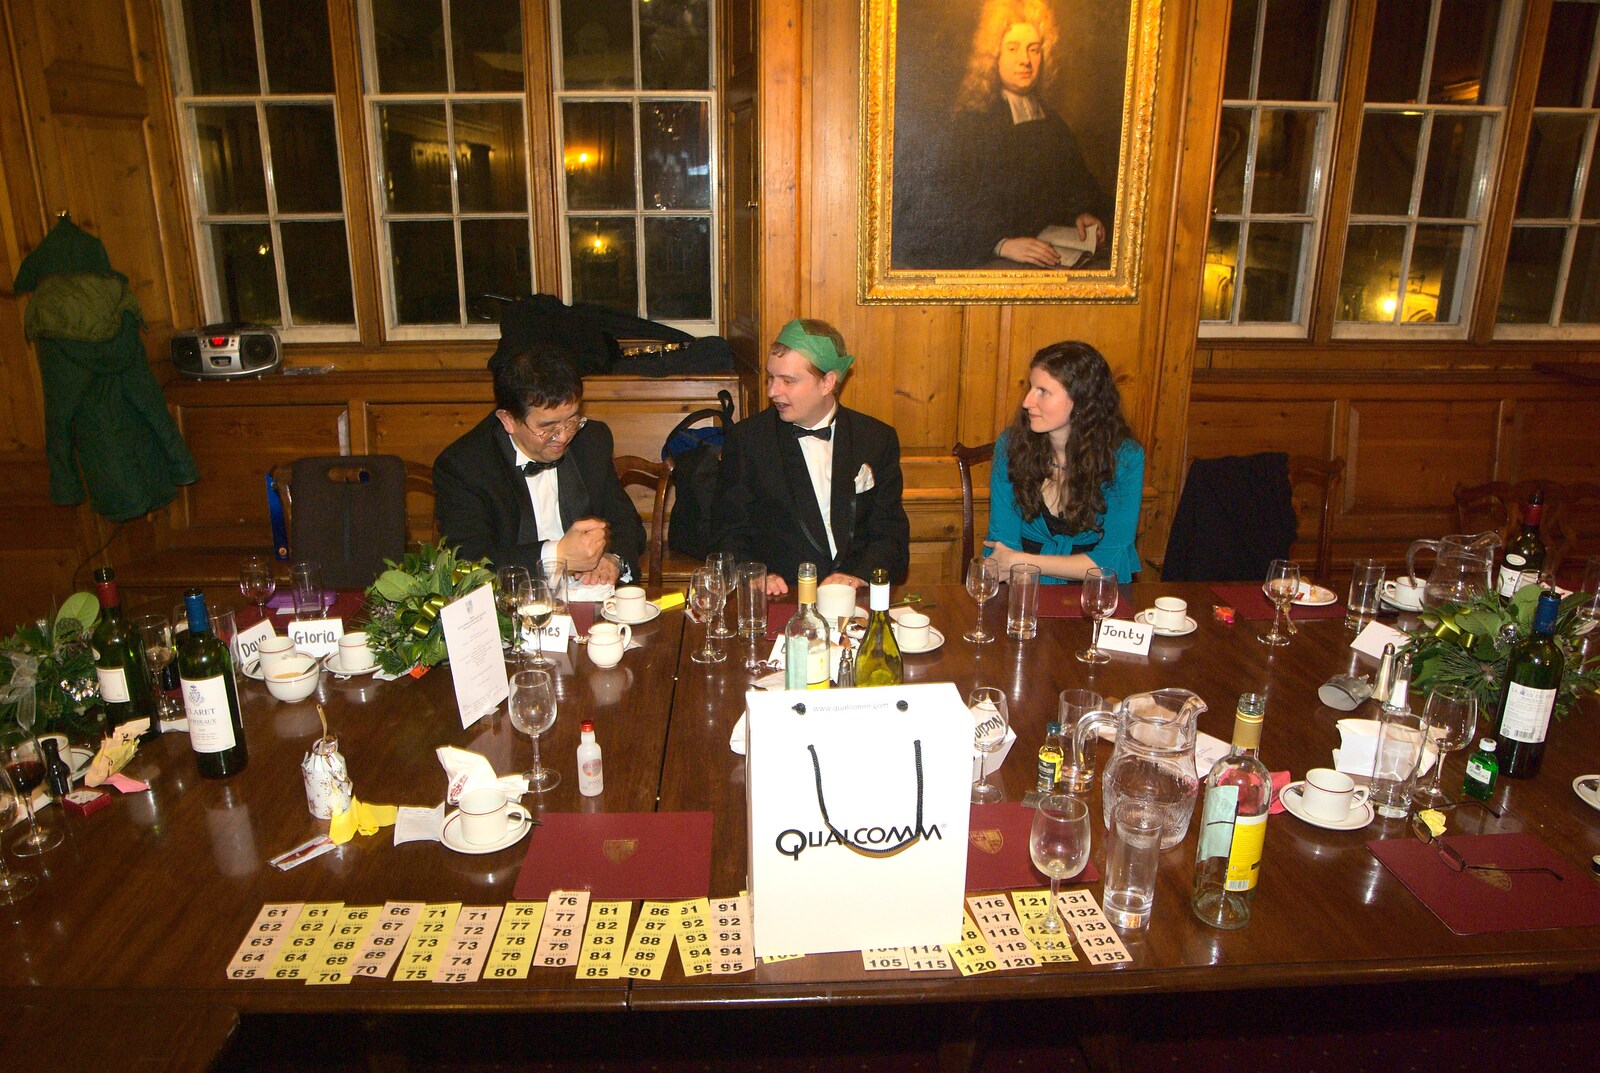 Raffle tickets all laid out from A Qualcomm Christmas, Christ's College, Cambridge - 8th December 2011